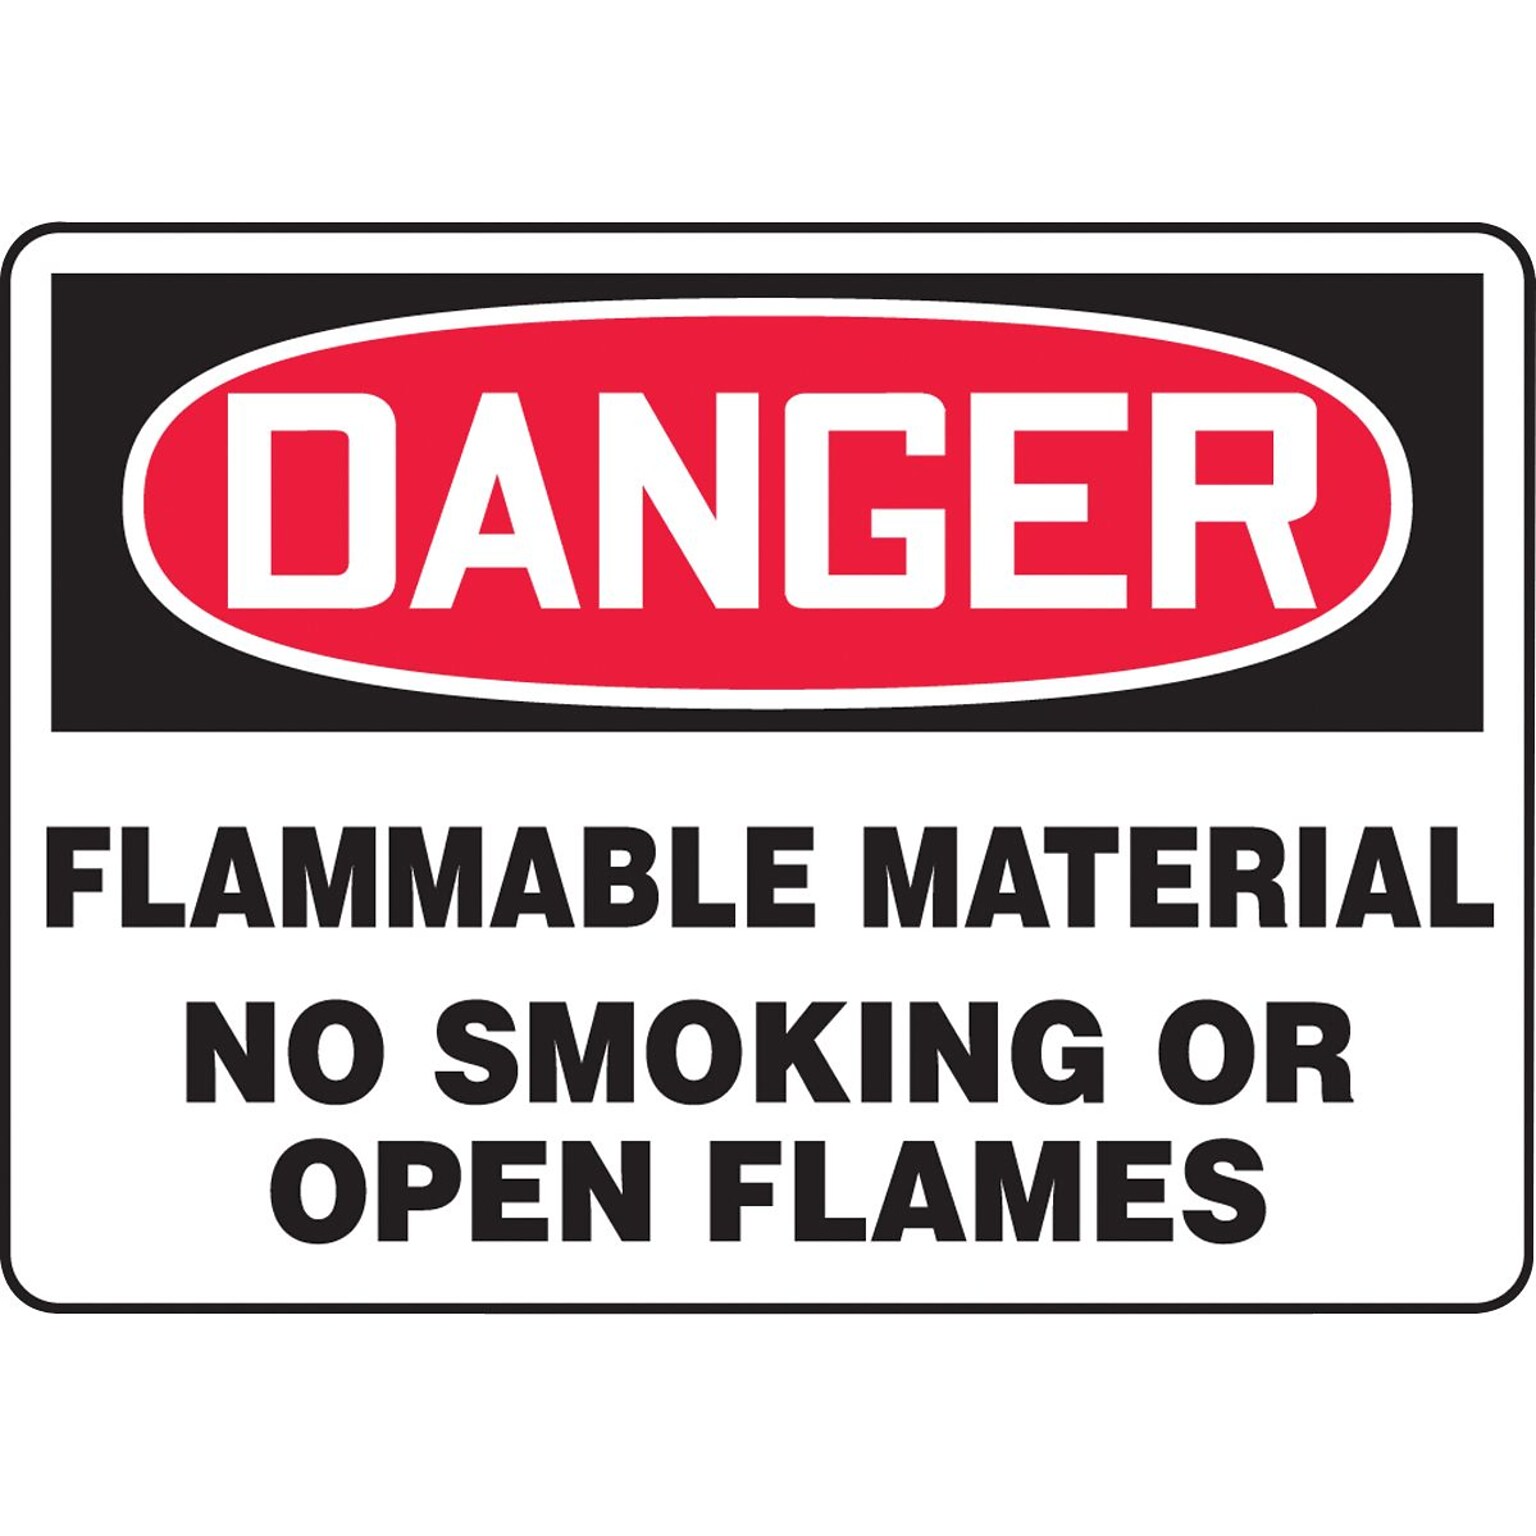 ACCUFORM SIGNS® Safety Sign, DANGER FLAMMABLE MATERIAL NO SMOKING OR OPEN FLAMES, 7 x 10, Aluminum